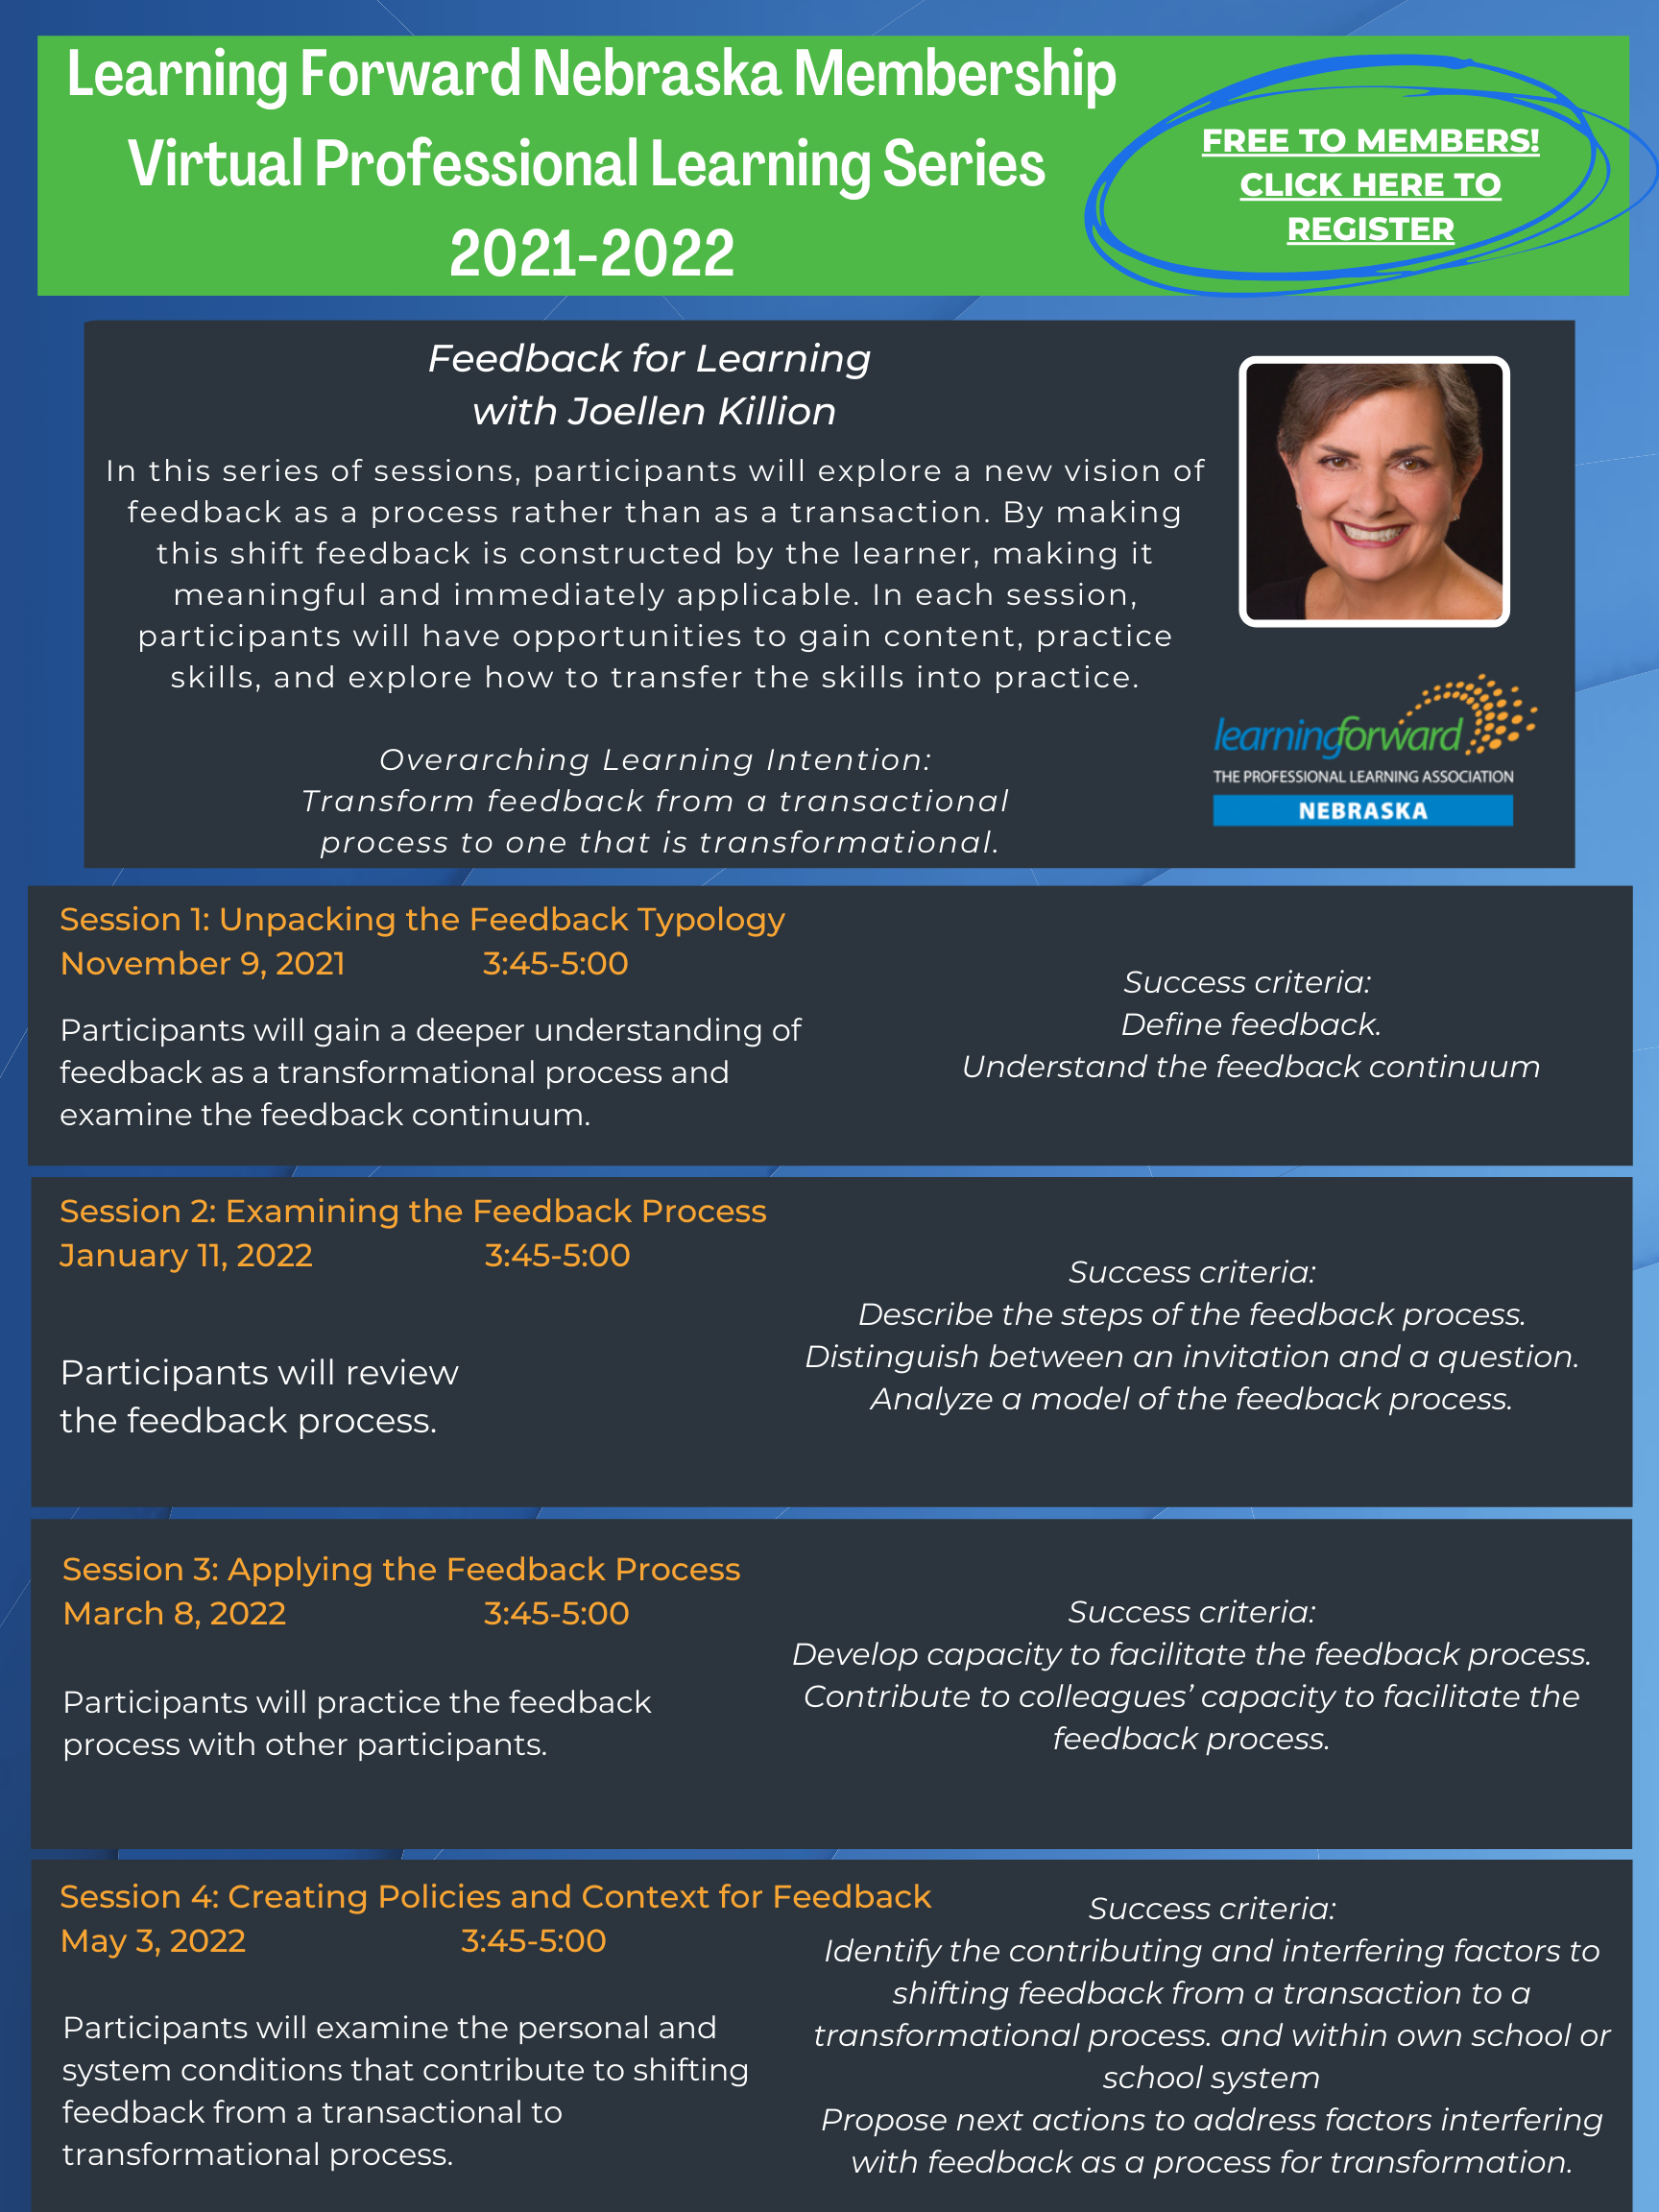 Click Here to Register for Learning Forward NE Membership Professional Learning Series (Virtual) 2021-2022